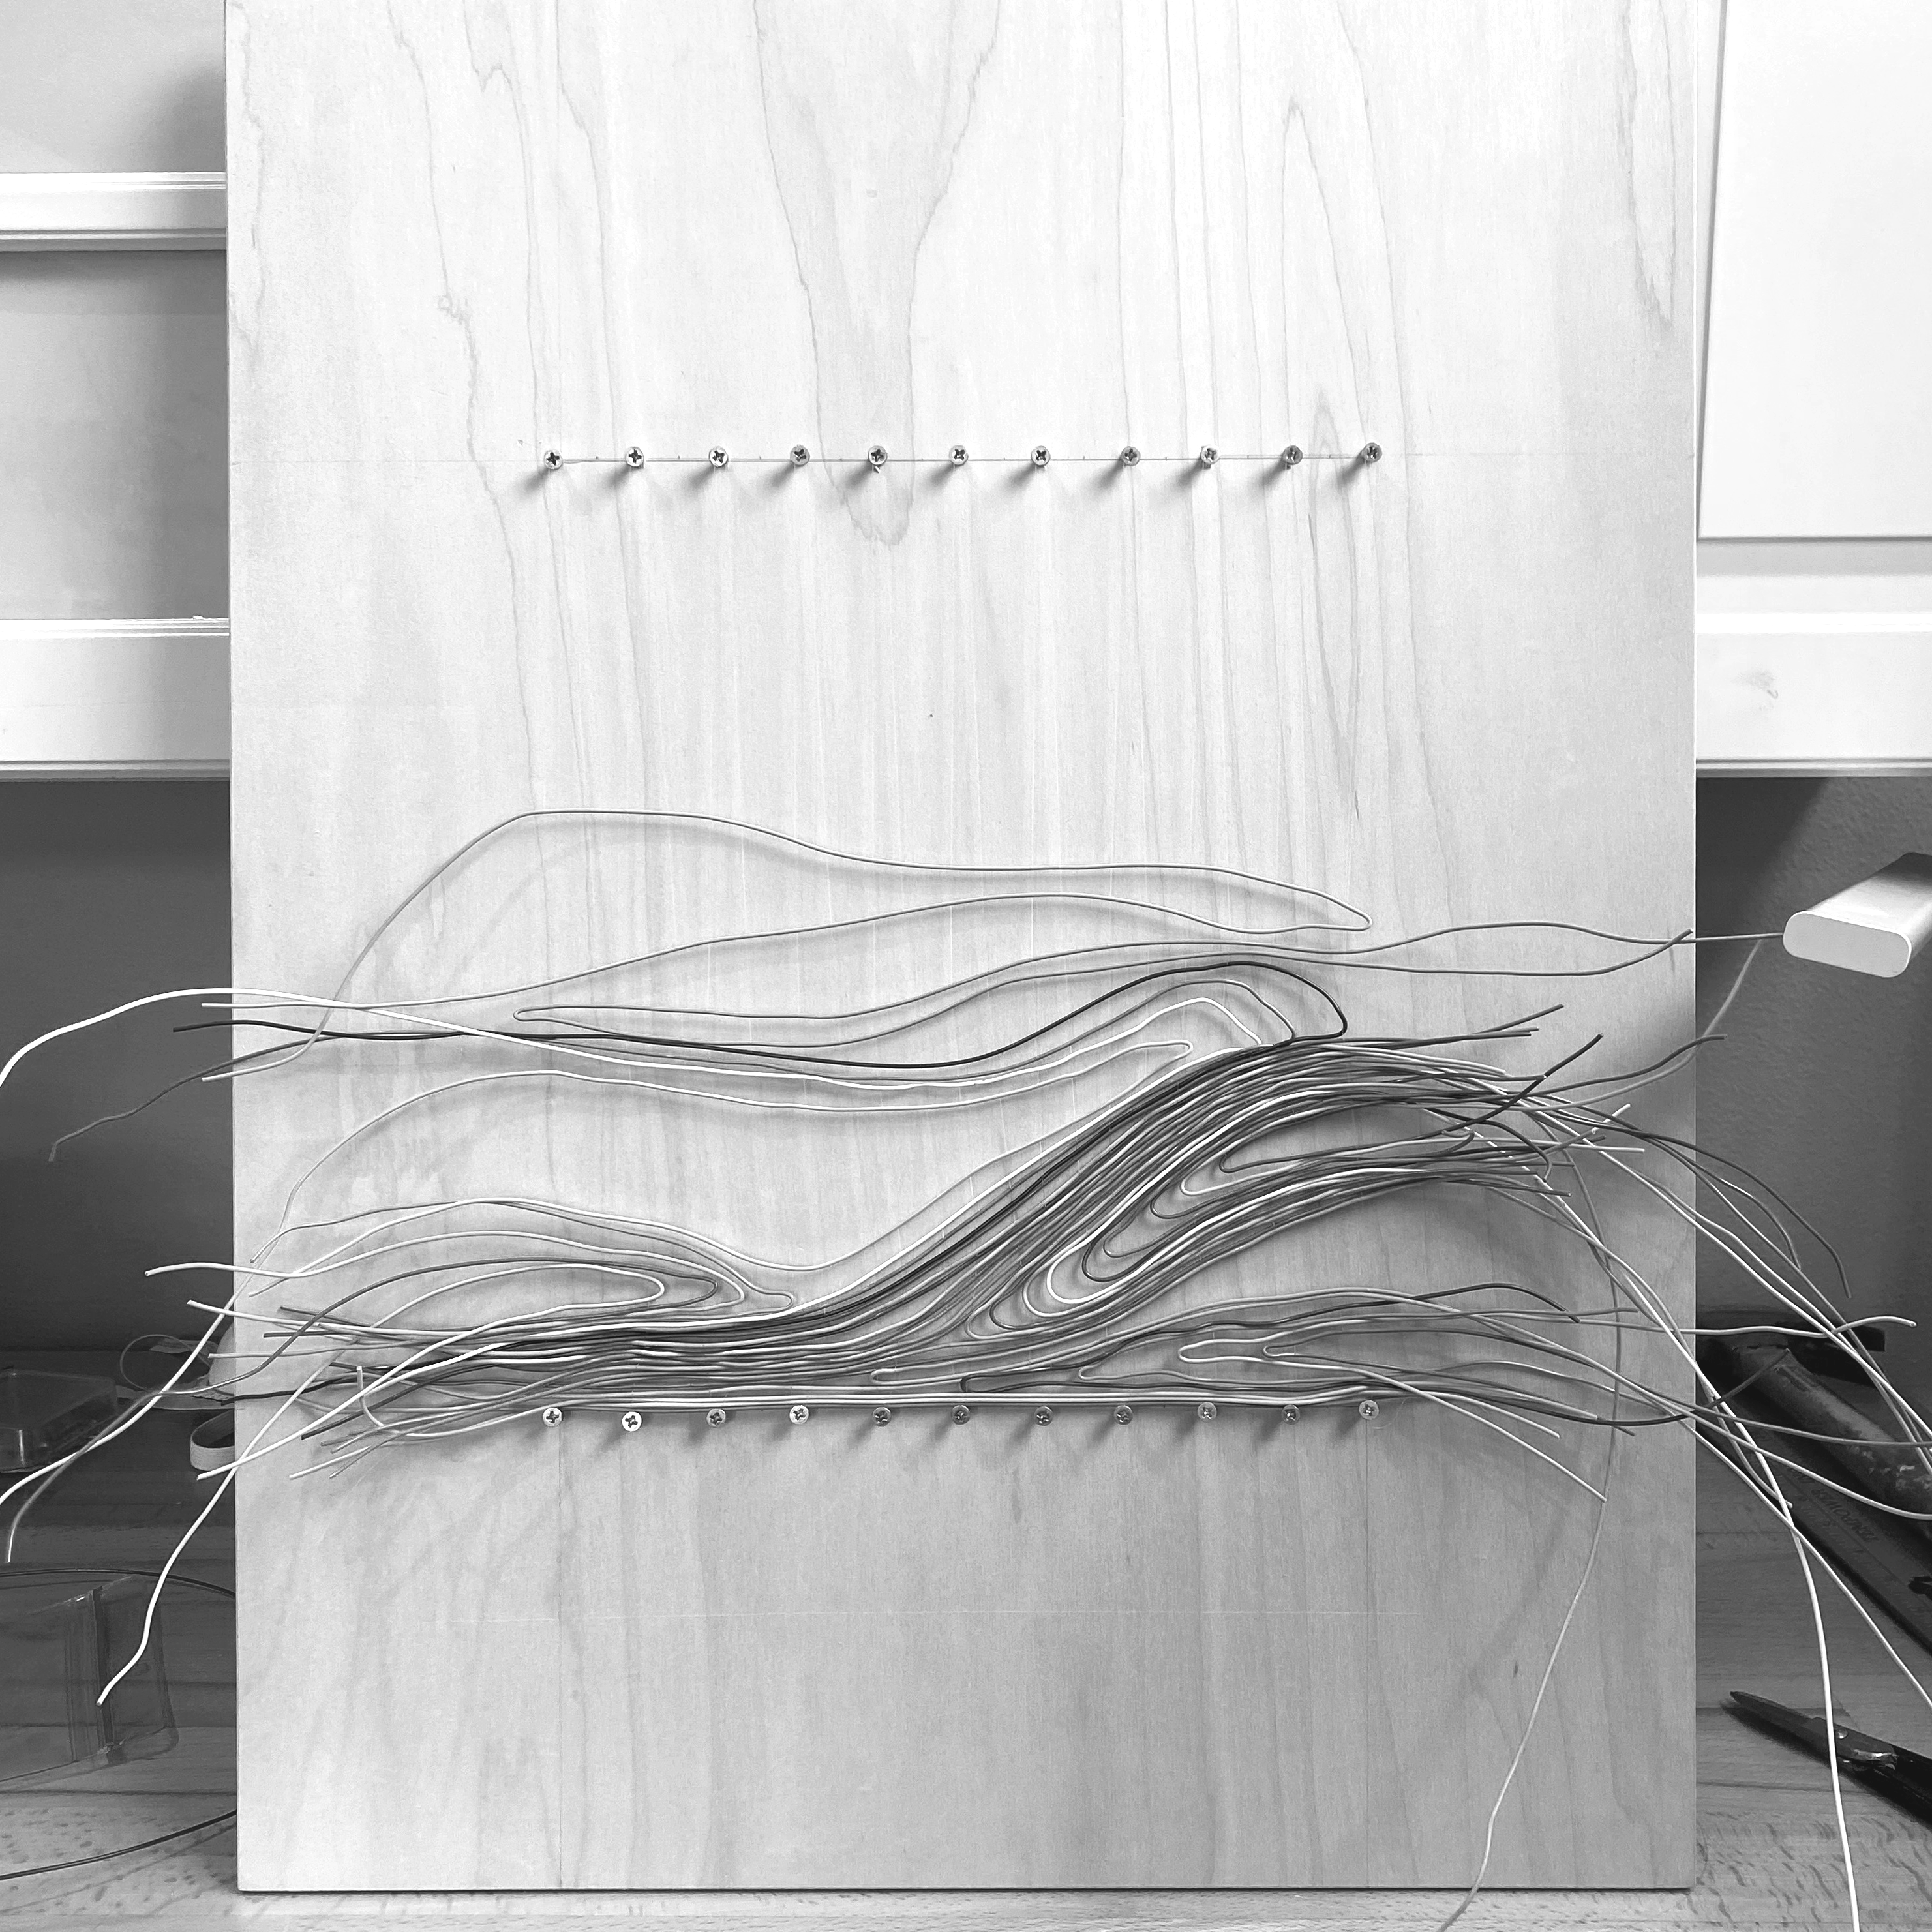 A process image of a wire weaving on a wood board with the wires going in all directions before getting trimmed